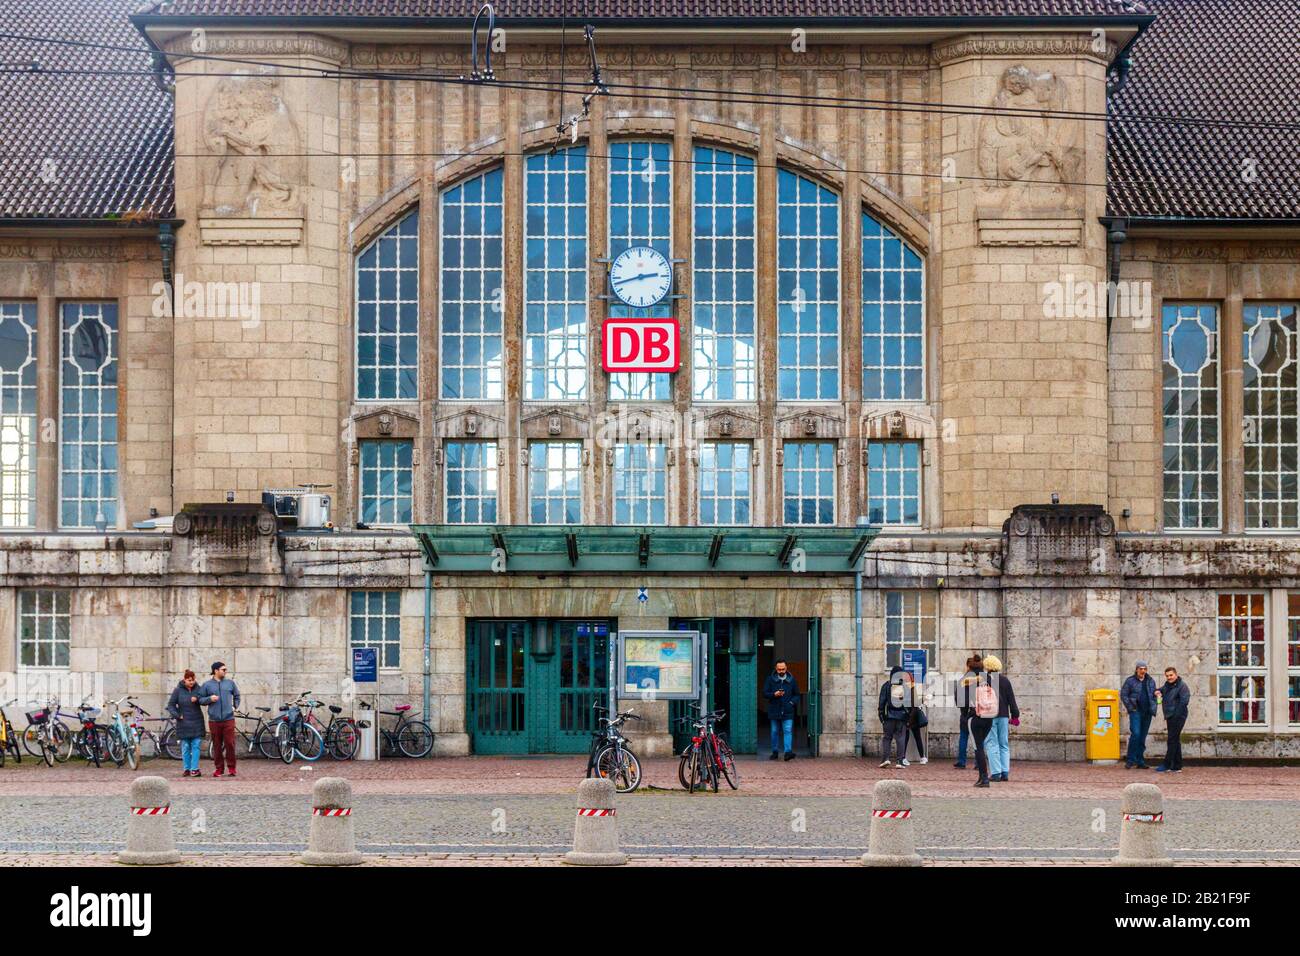 Frontal view of the Darmstadt Hauptbahnhof (Main Railway Station) facade. The station is built in Art Nouveau architectural style. Germany. Stock Photo